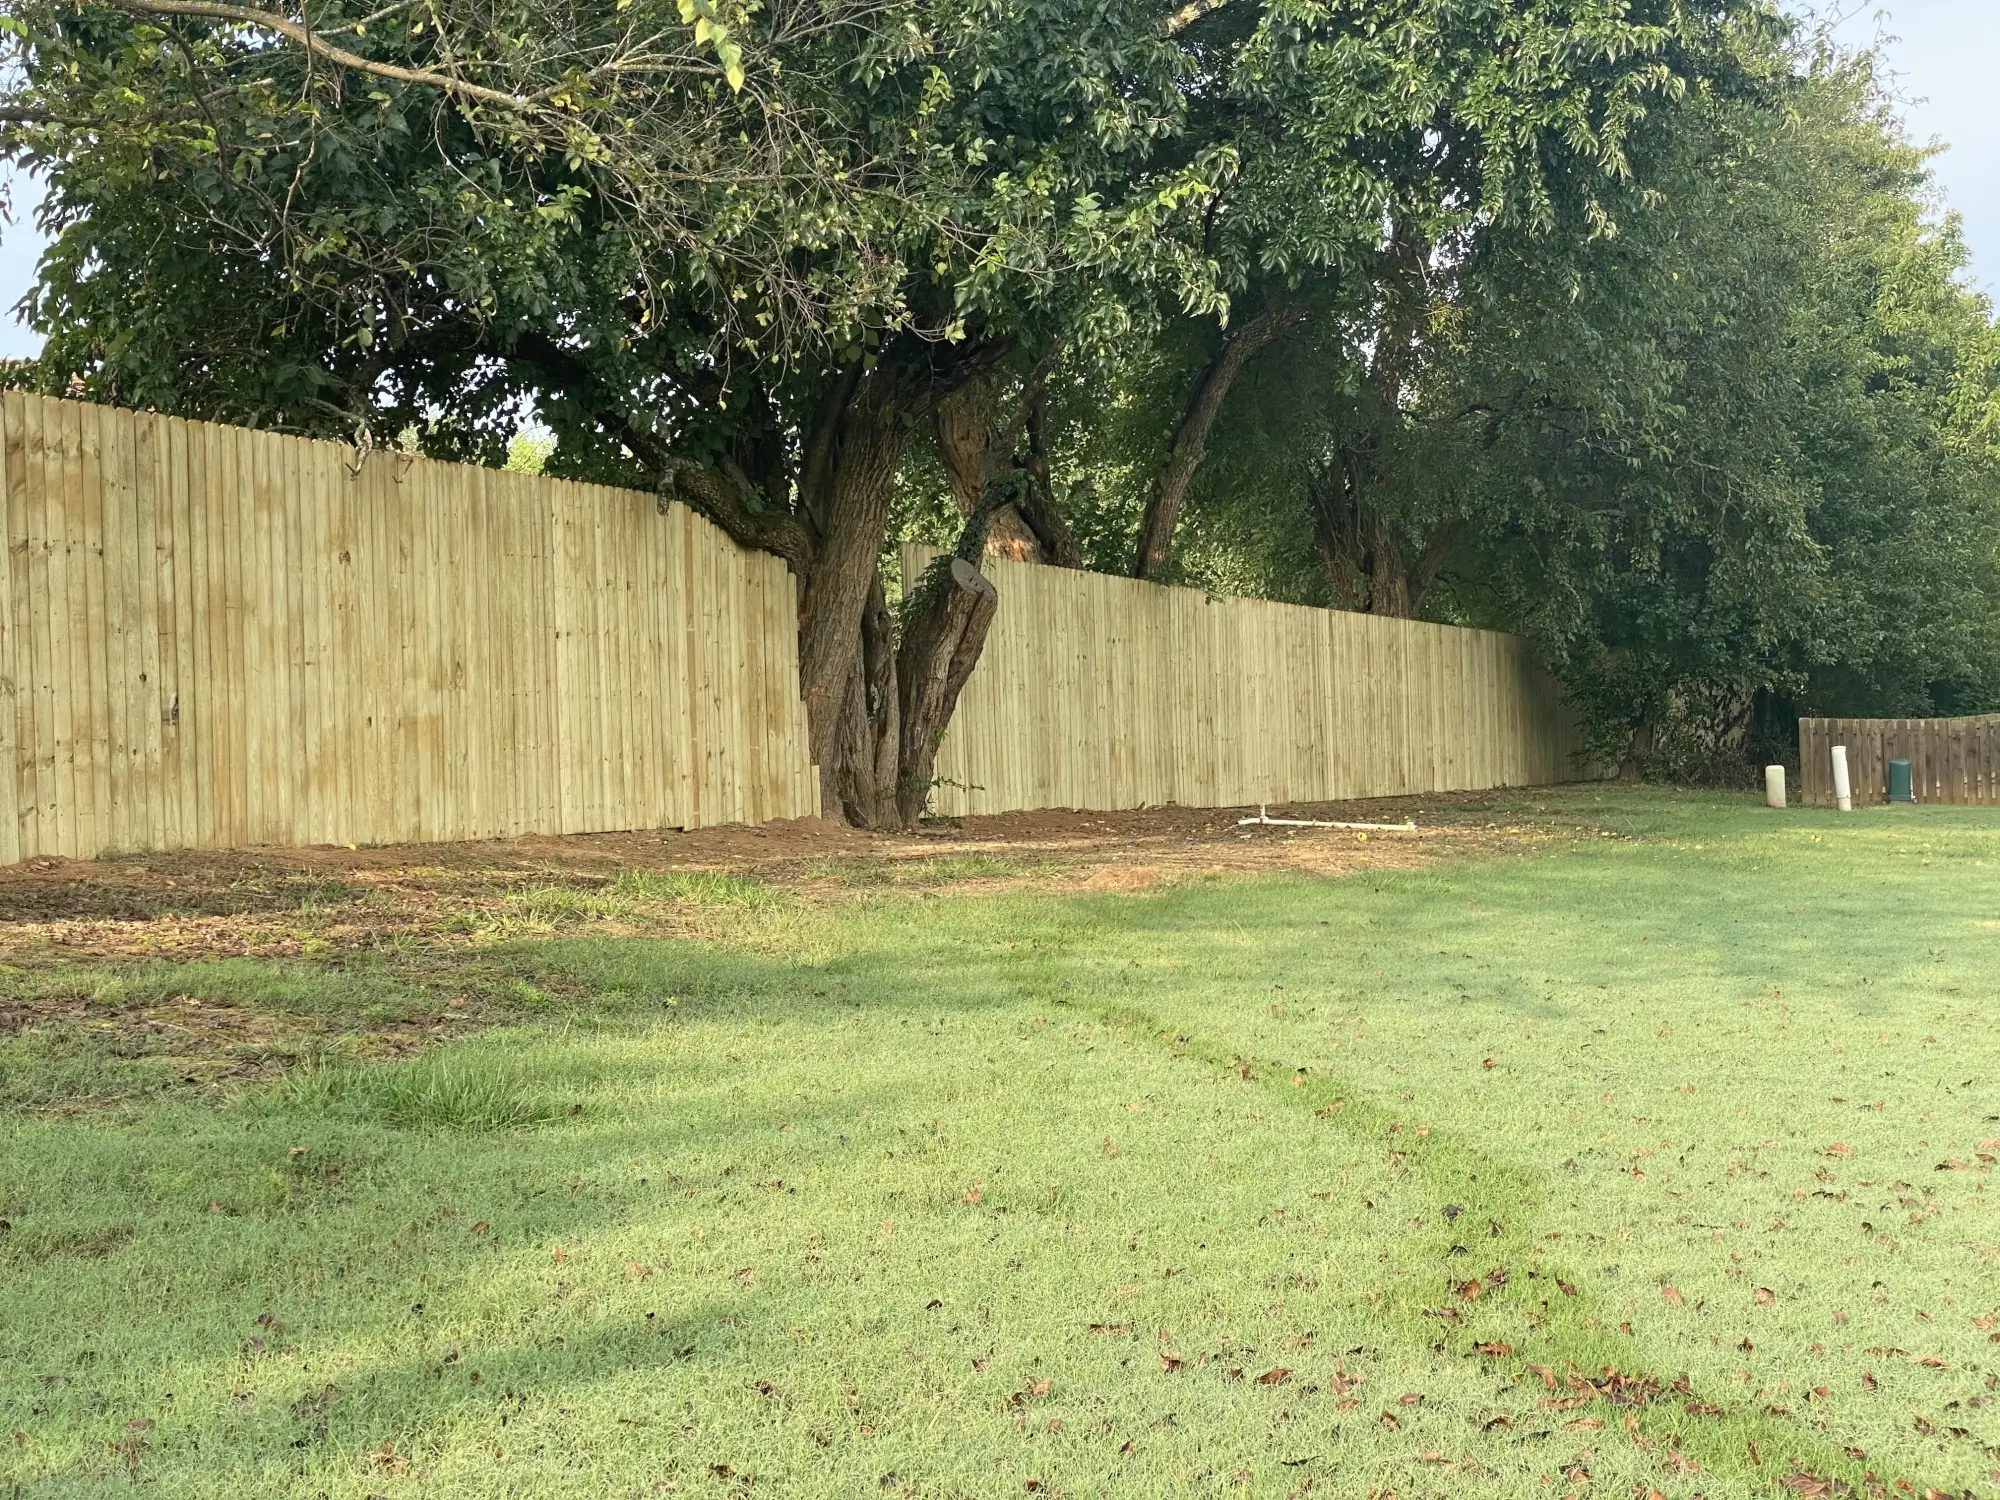 Residential wooden fence around large back yard